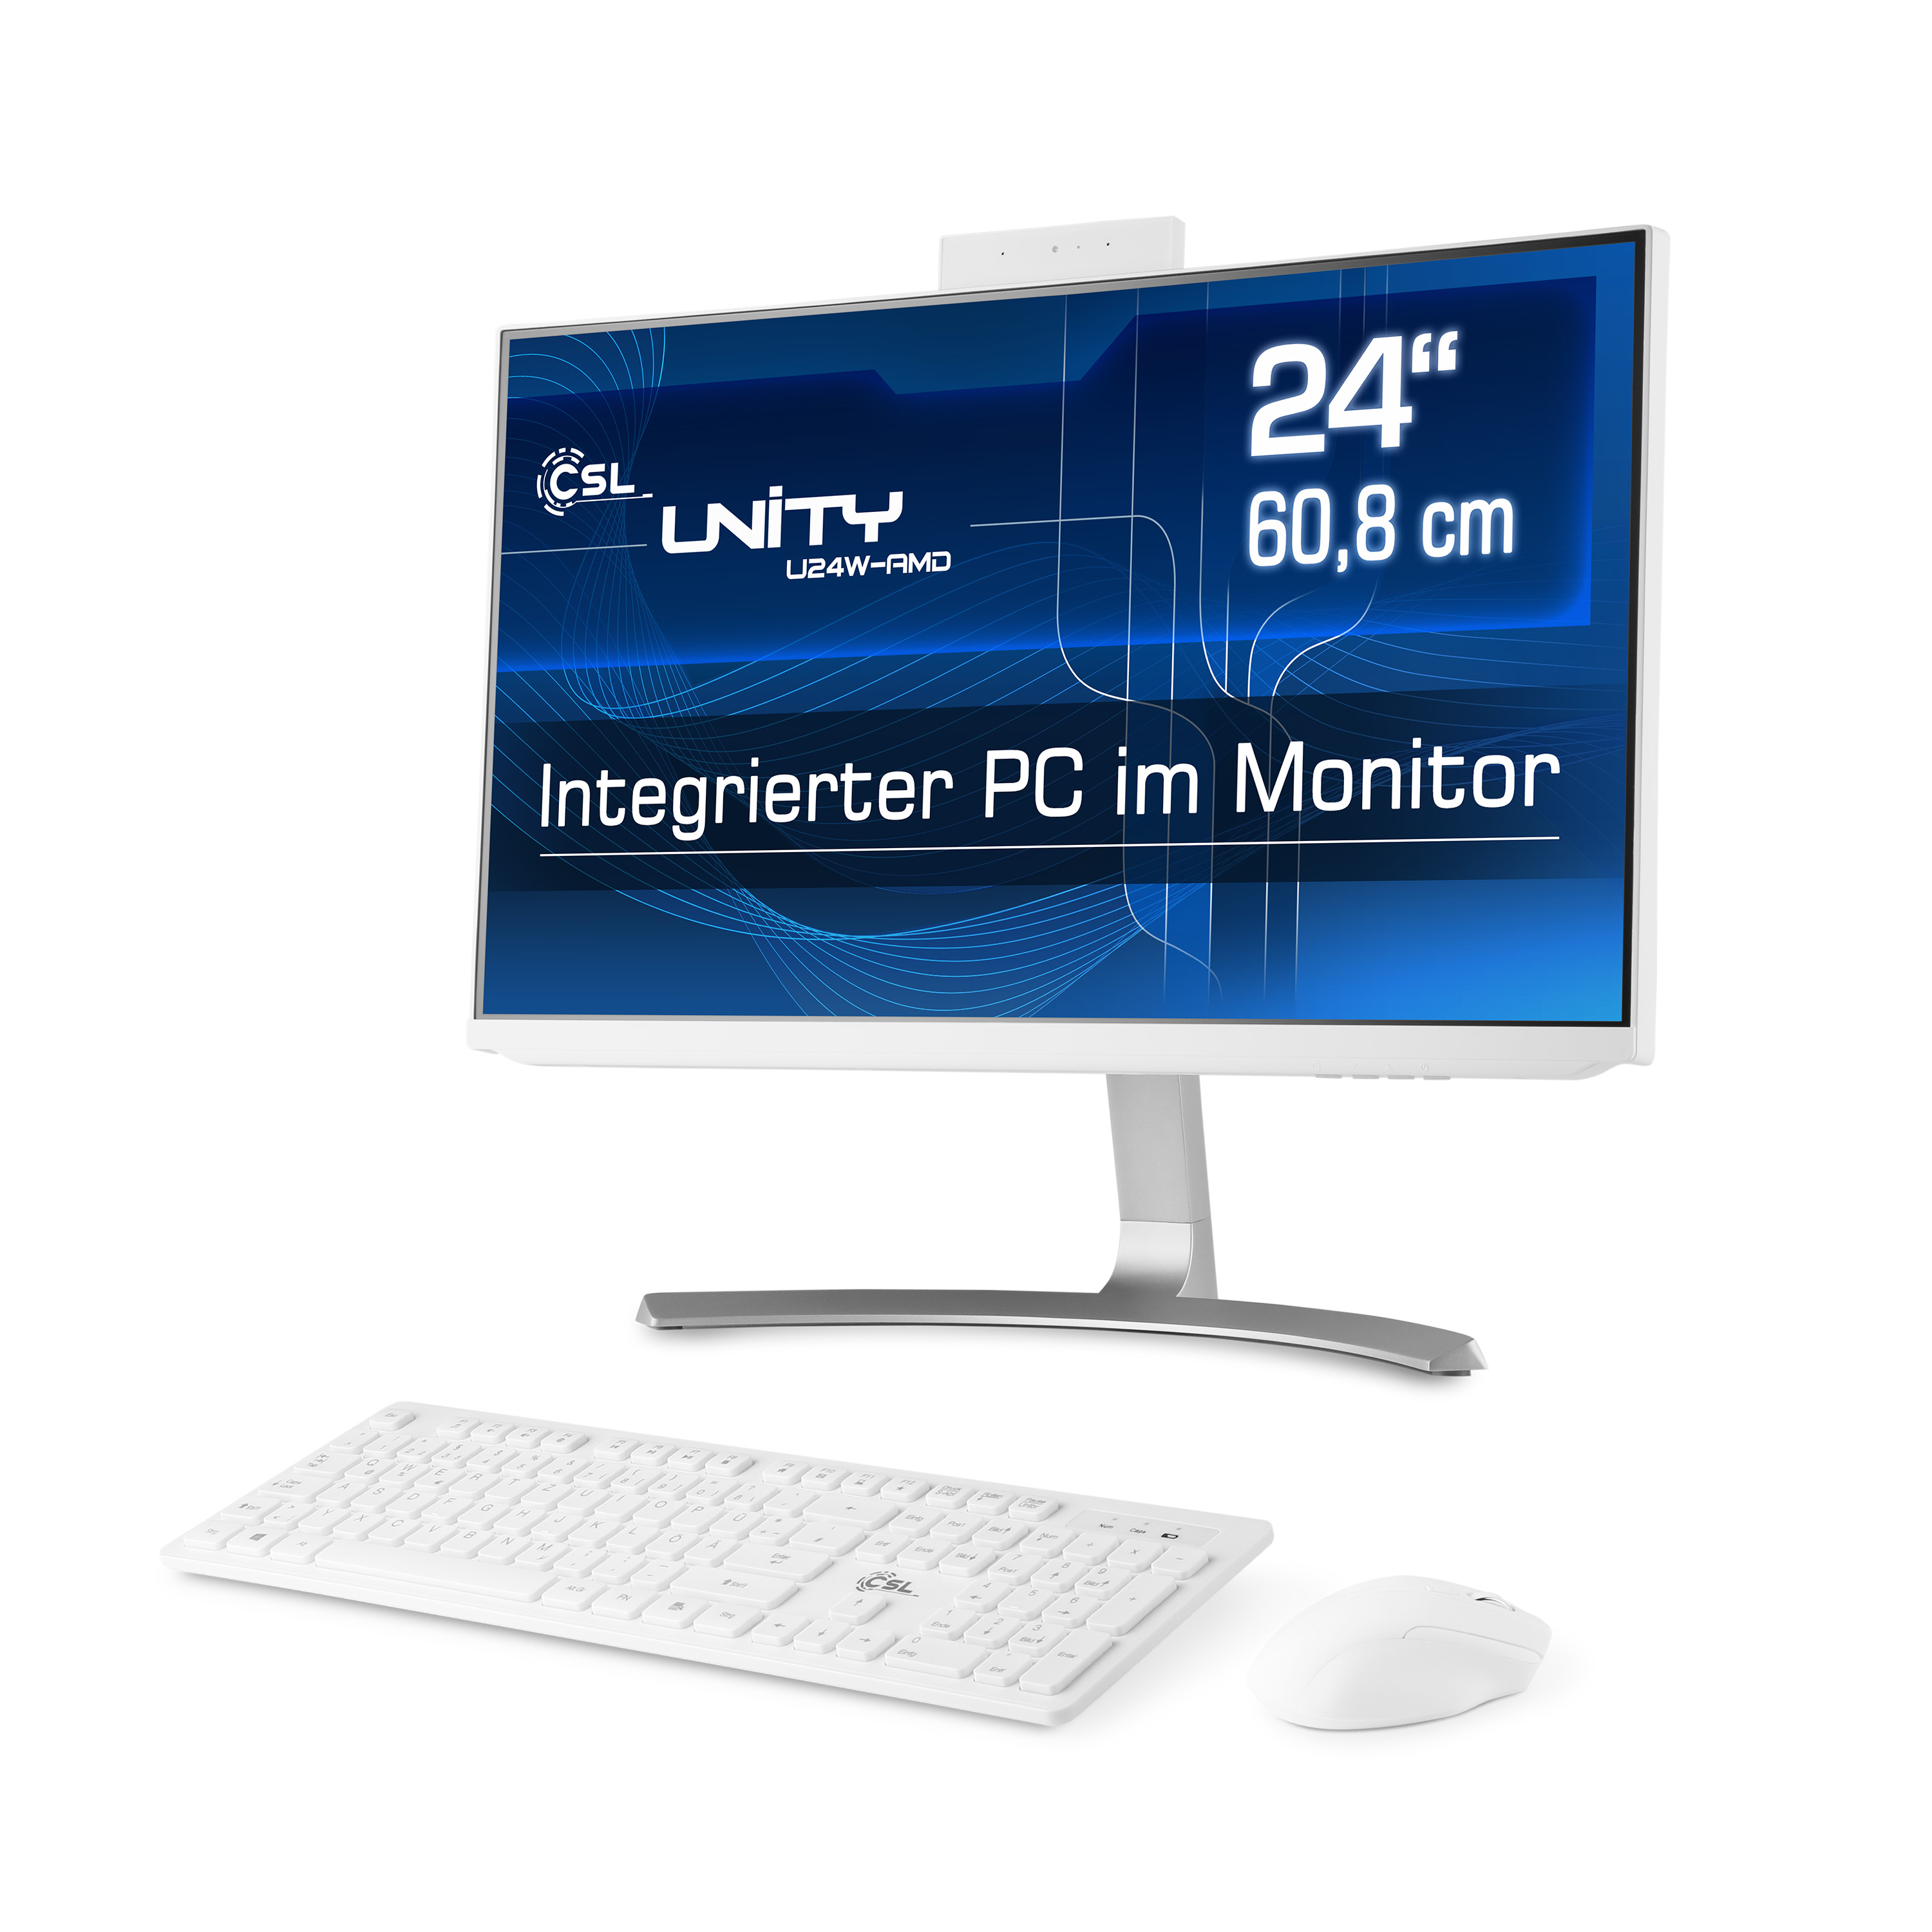 CSL Unity U24W-AMD / 5650GE GB AMD SSD, Win GB mit RAM / 23,8 16 Zoll Display, / GB 11 1000 16 Graphics, All-in-One-PC GB weiß 1000 Radeon Home, RAM, 